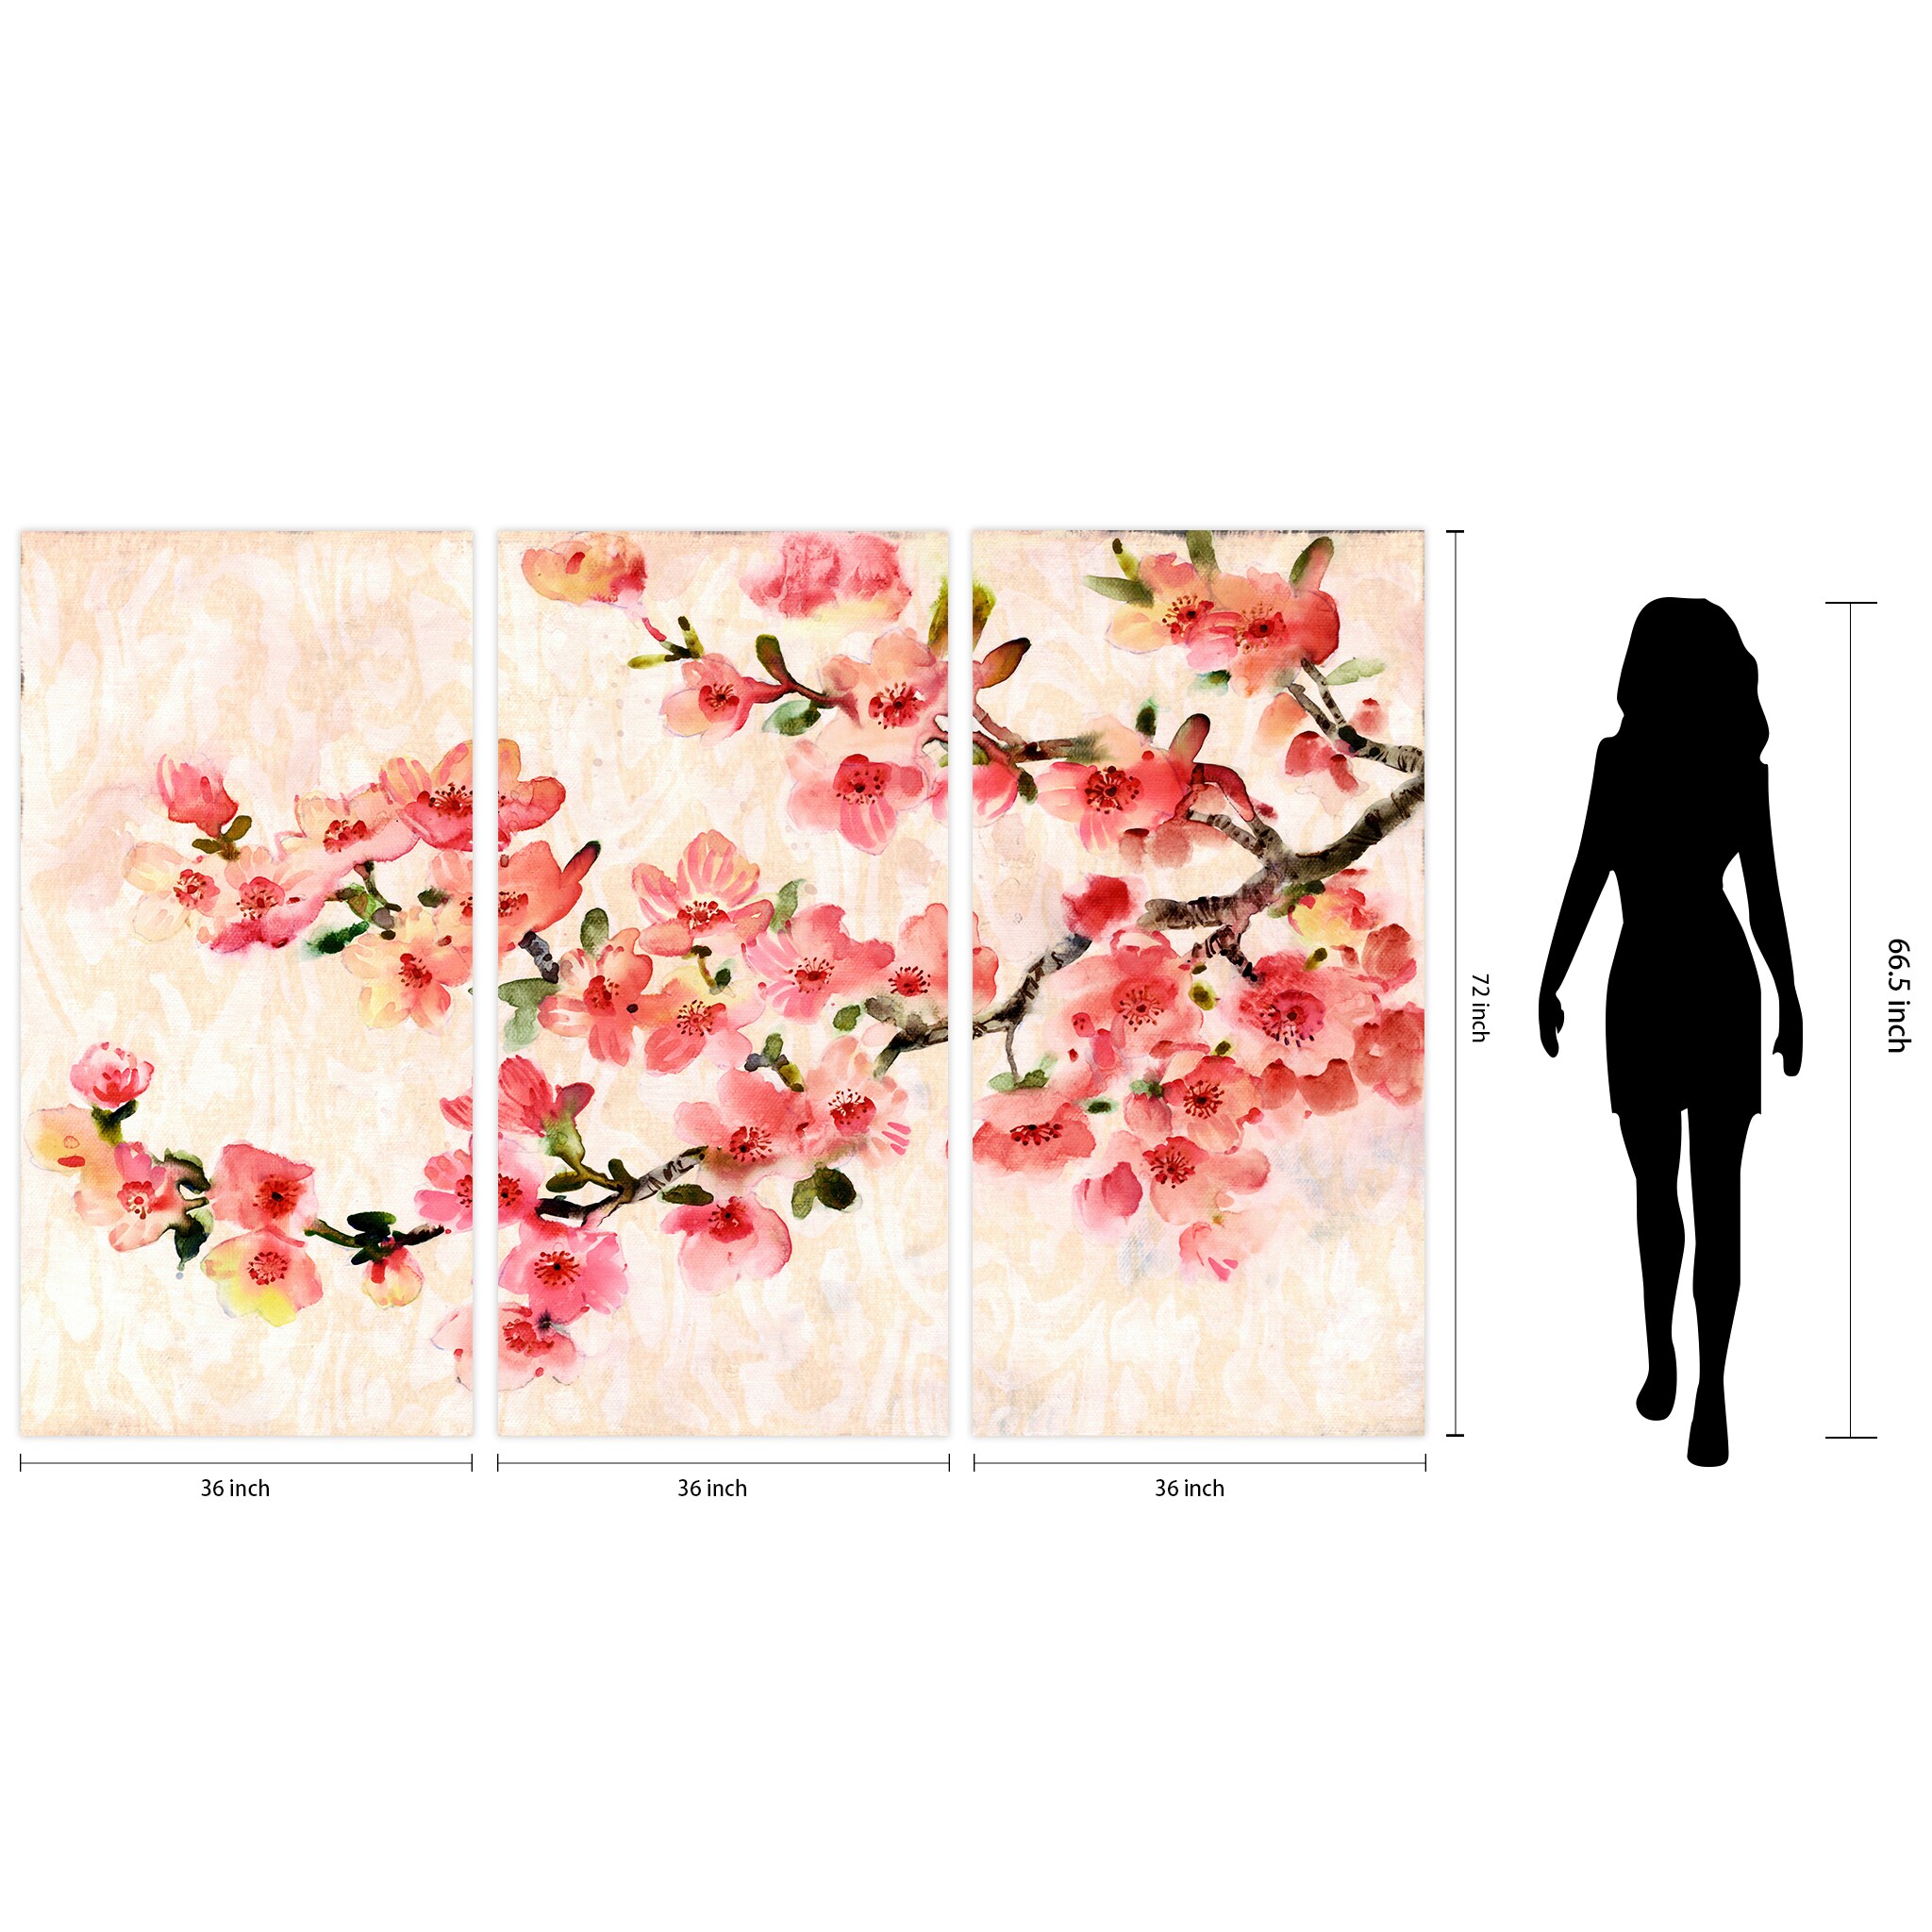 Empire Art Direct 72-in H x 108-in W Floral Glass Print in the 